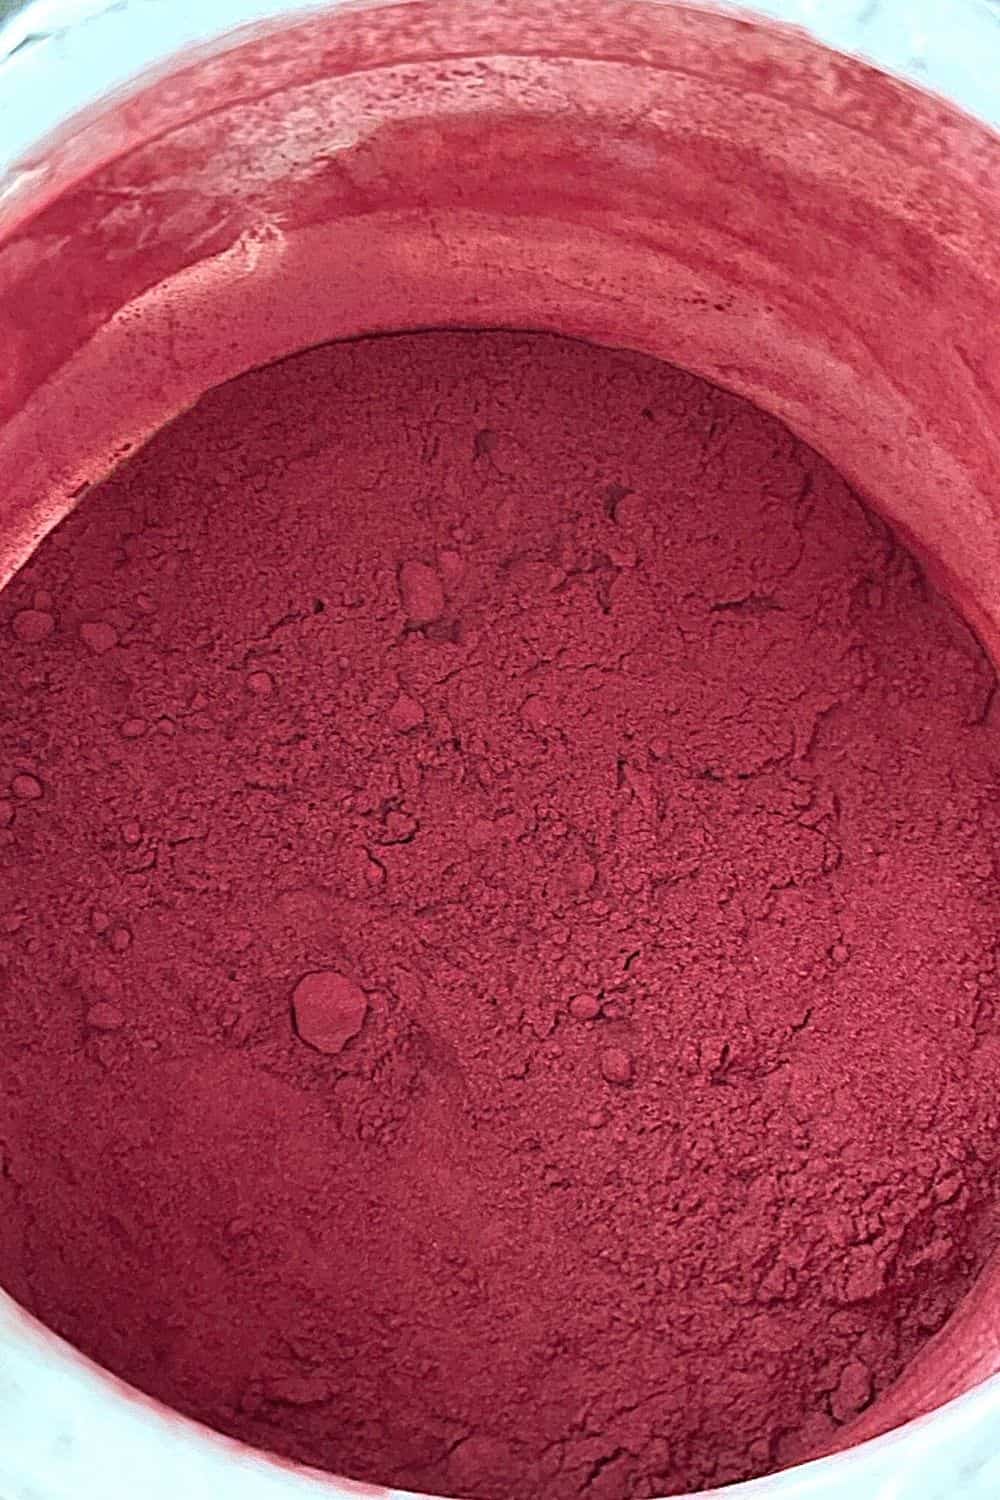 Beet Root and ACV Powder in Jar a superfood powder